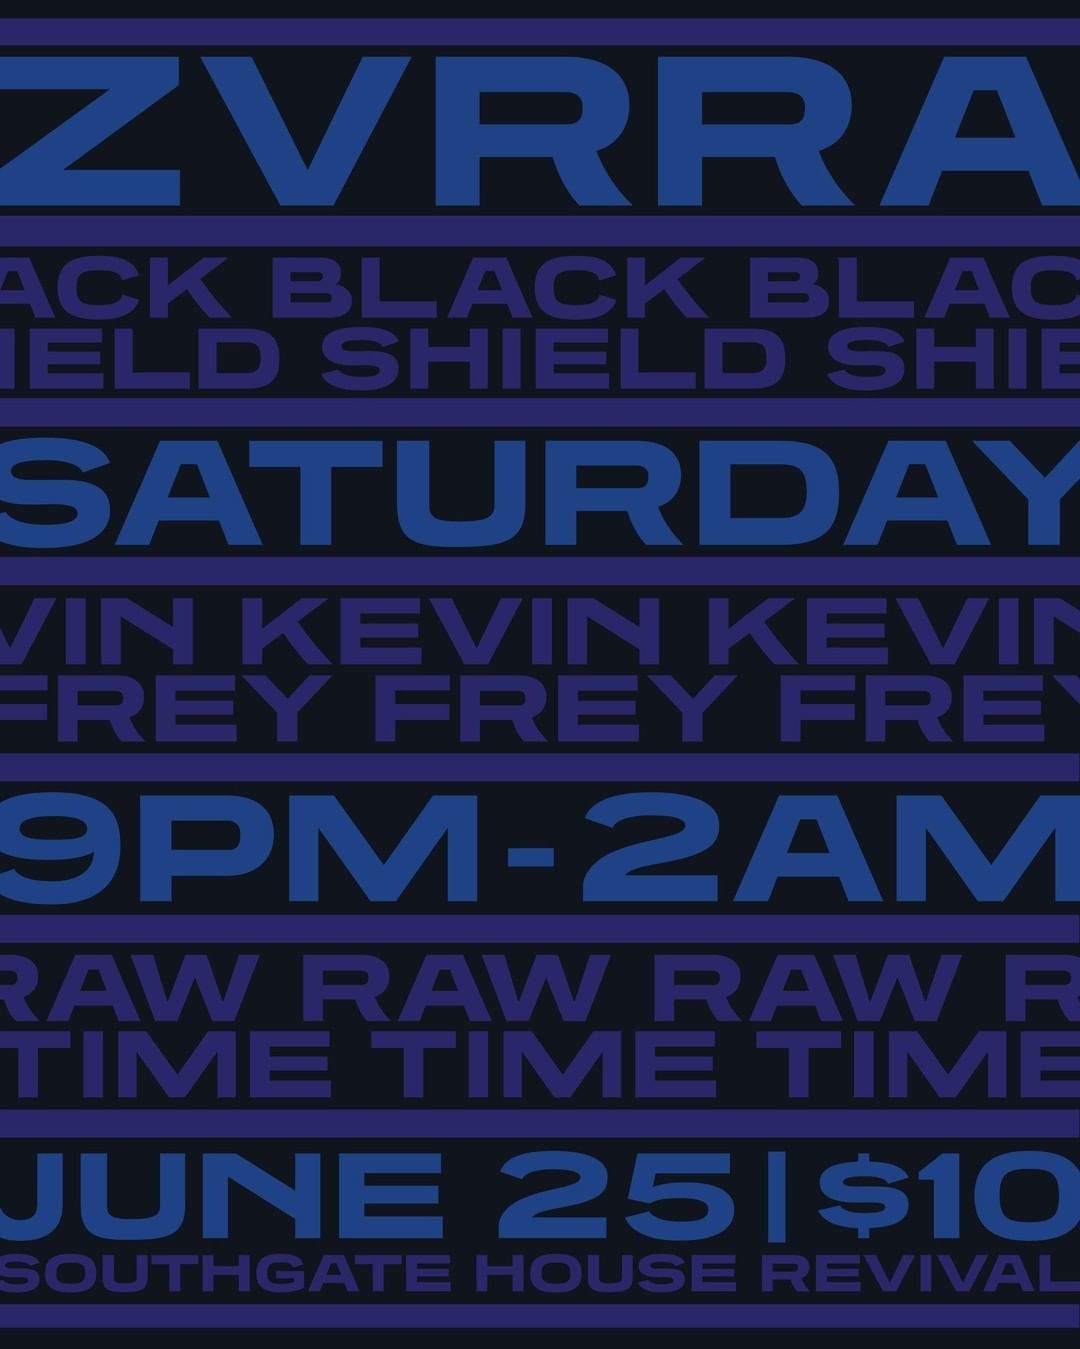 Flow x Whited Sepulchre Records present Zvrra with RAW TIME, Kevin Frey and Black Shield - Página frontal